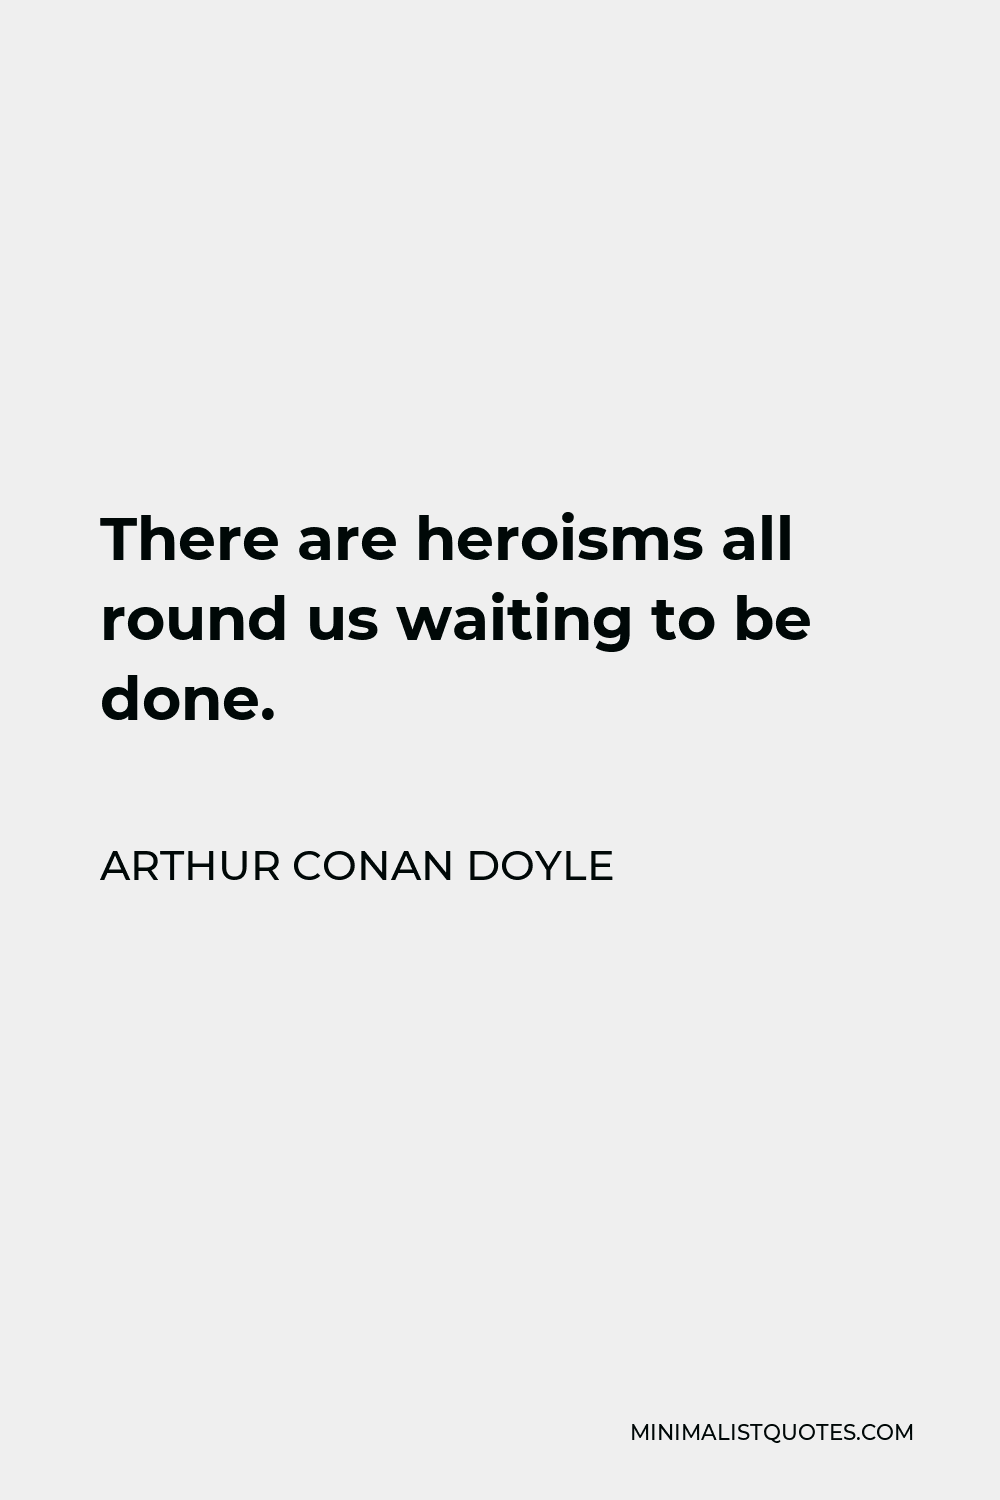 Arthur Conan Doyle Quote - There are heroisms all round us waiting to be done.